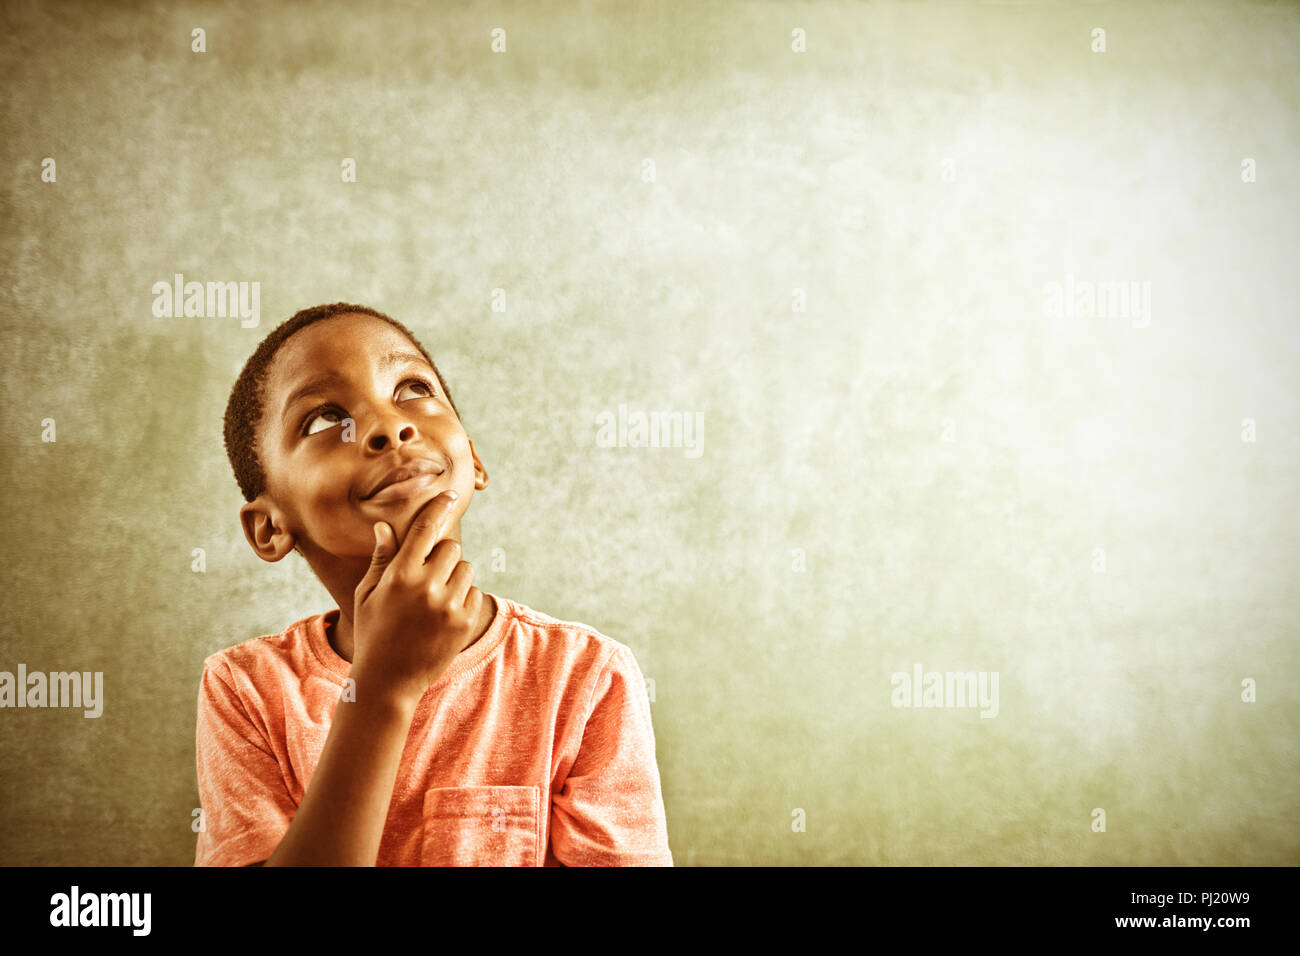 Thoughtful boy against greenboard Stock Photo